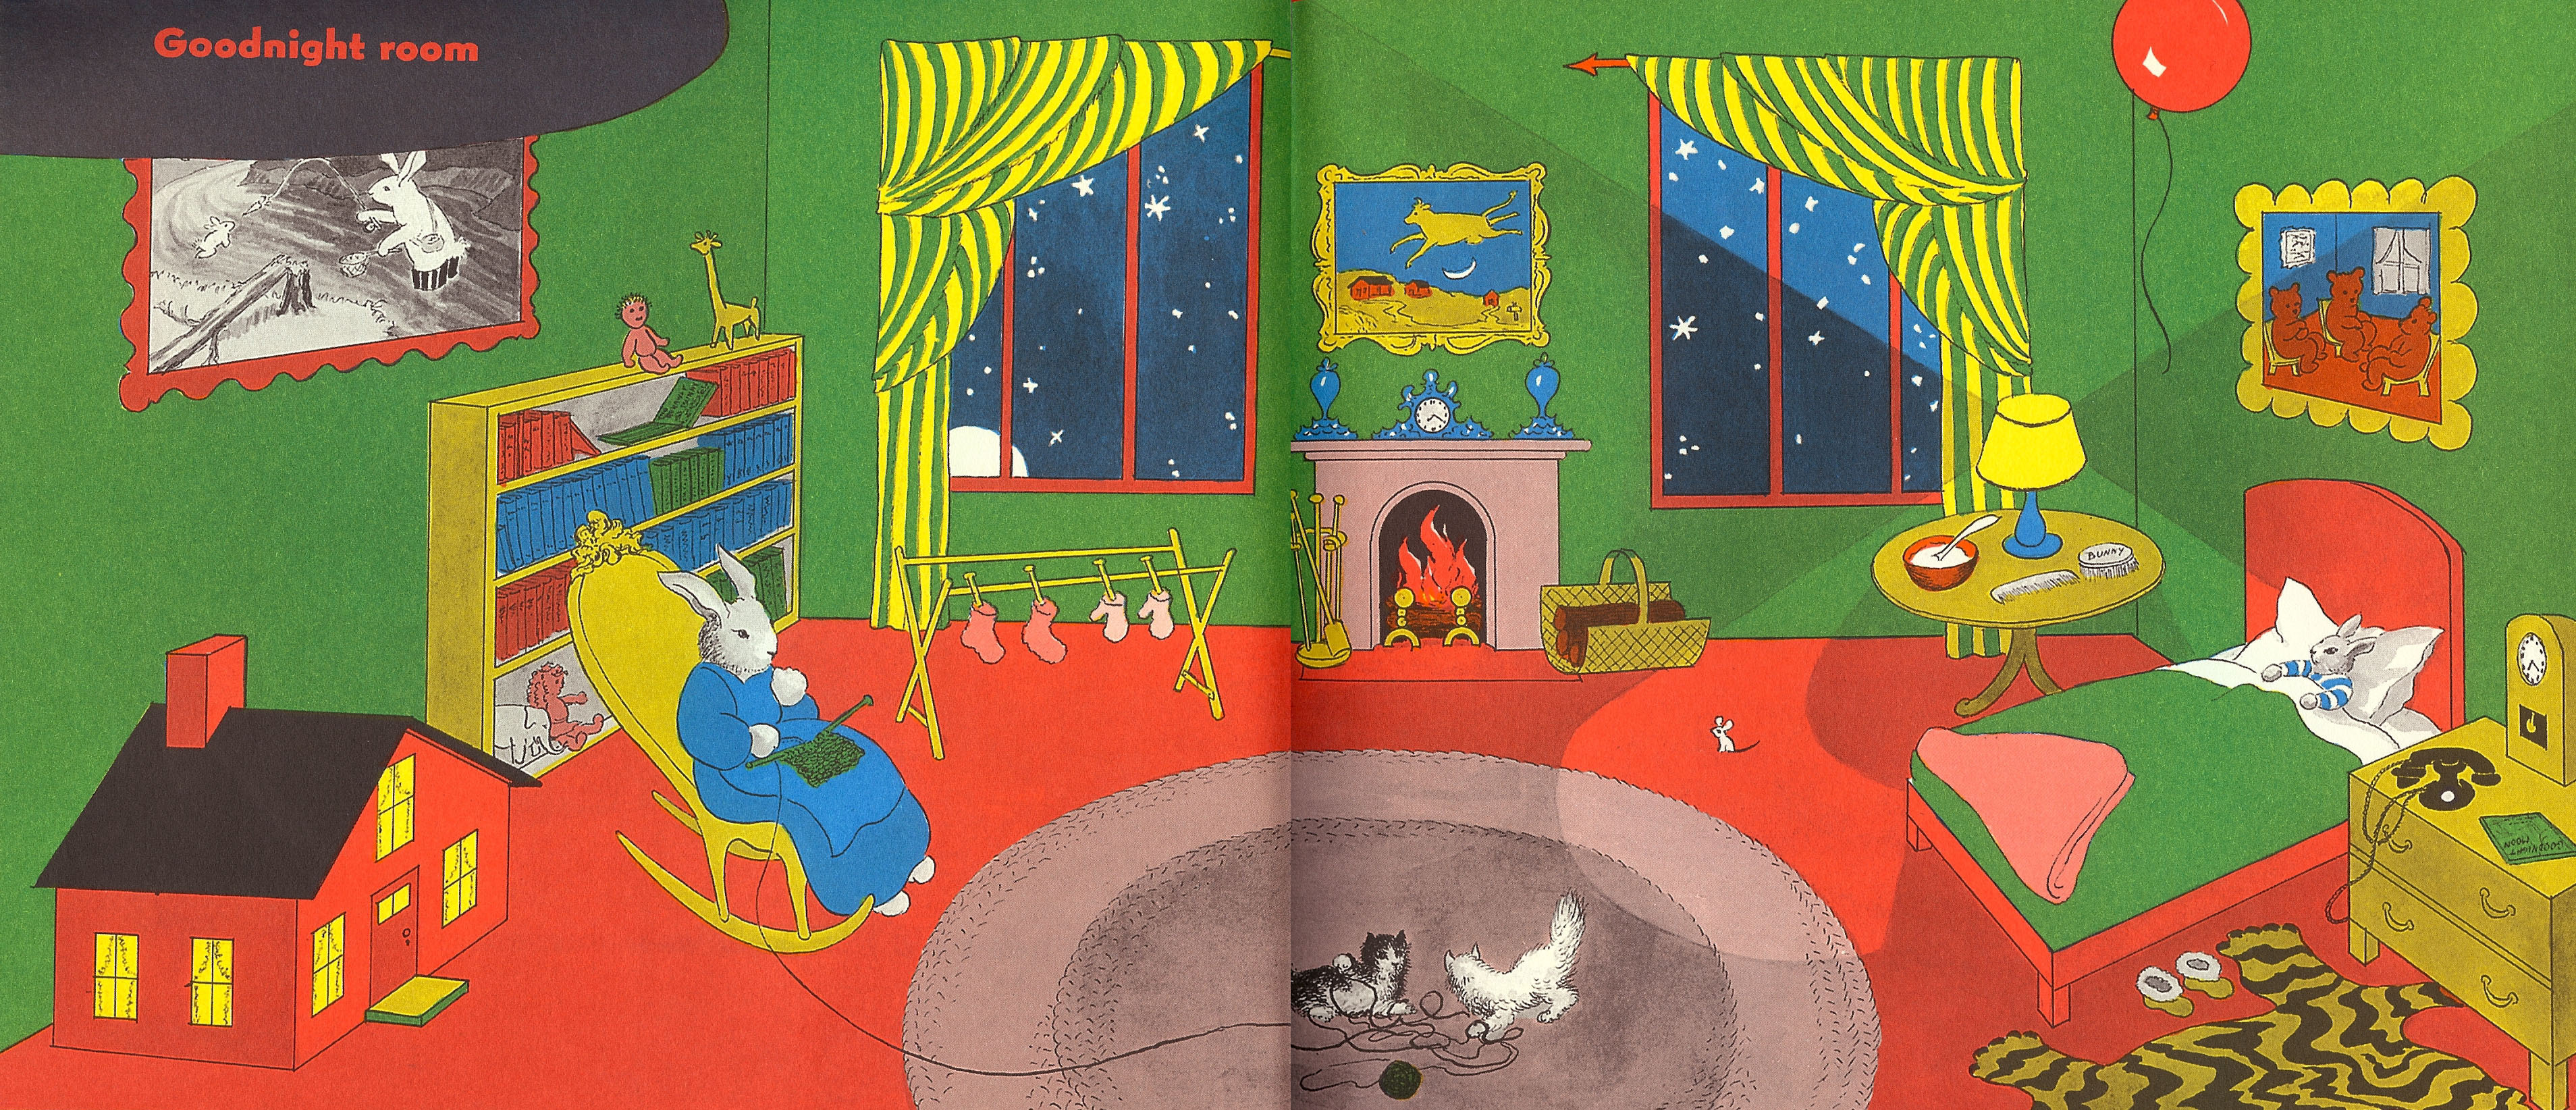 goodnight-moon-two-page